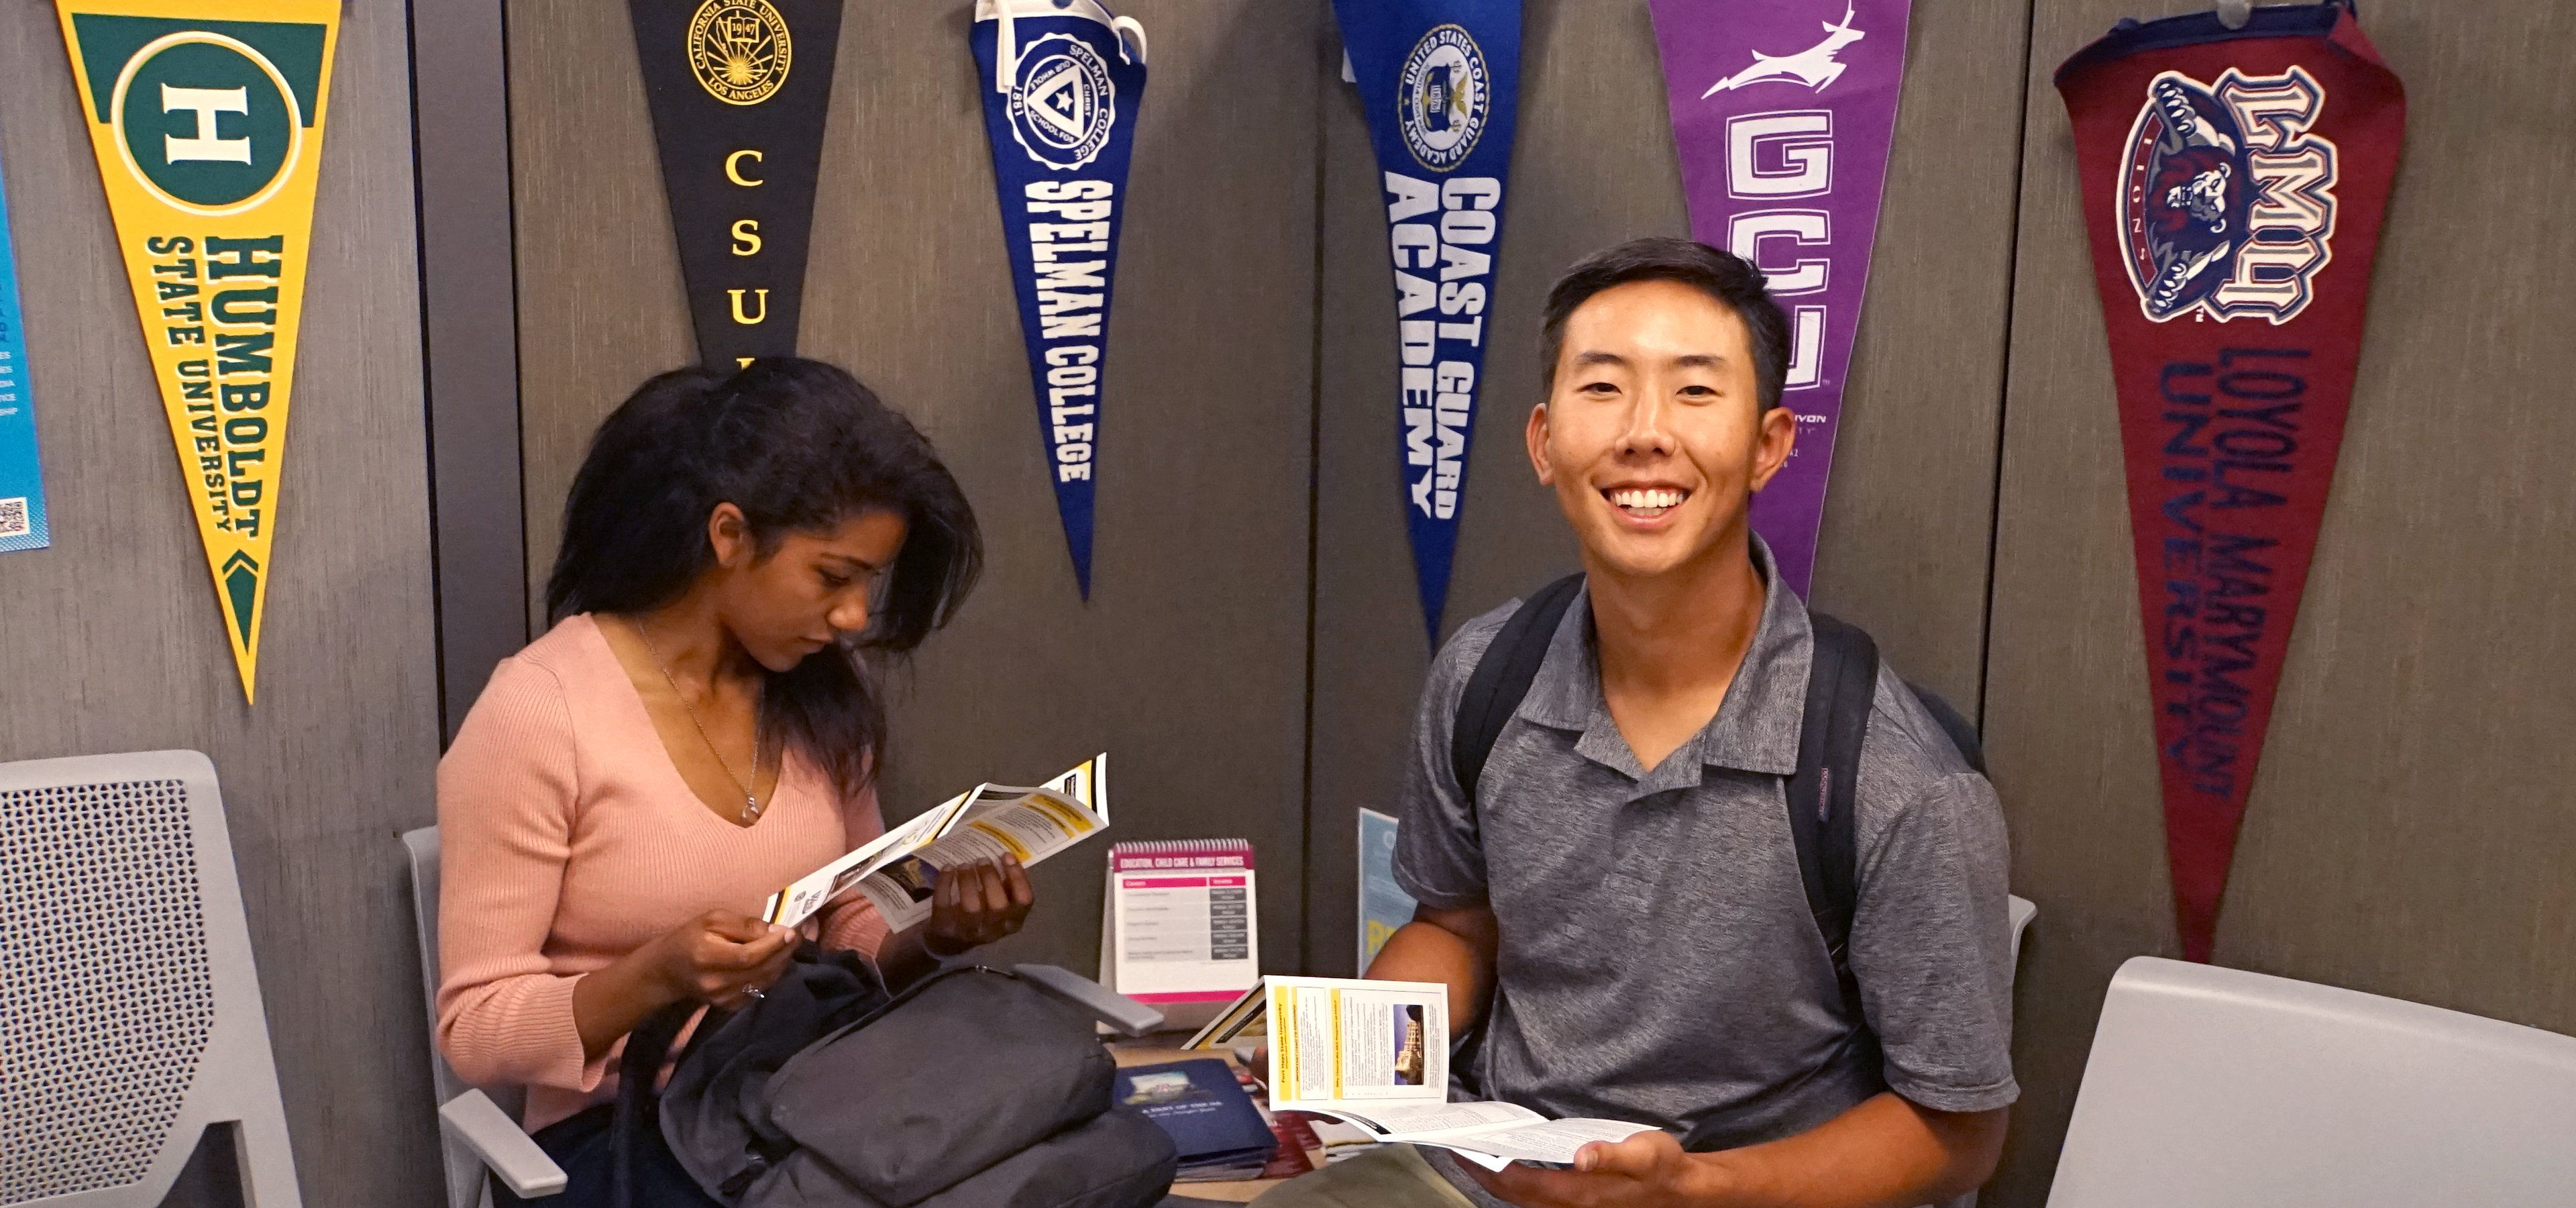 Students Reading a Brochure